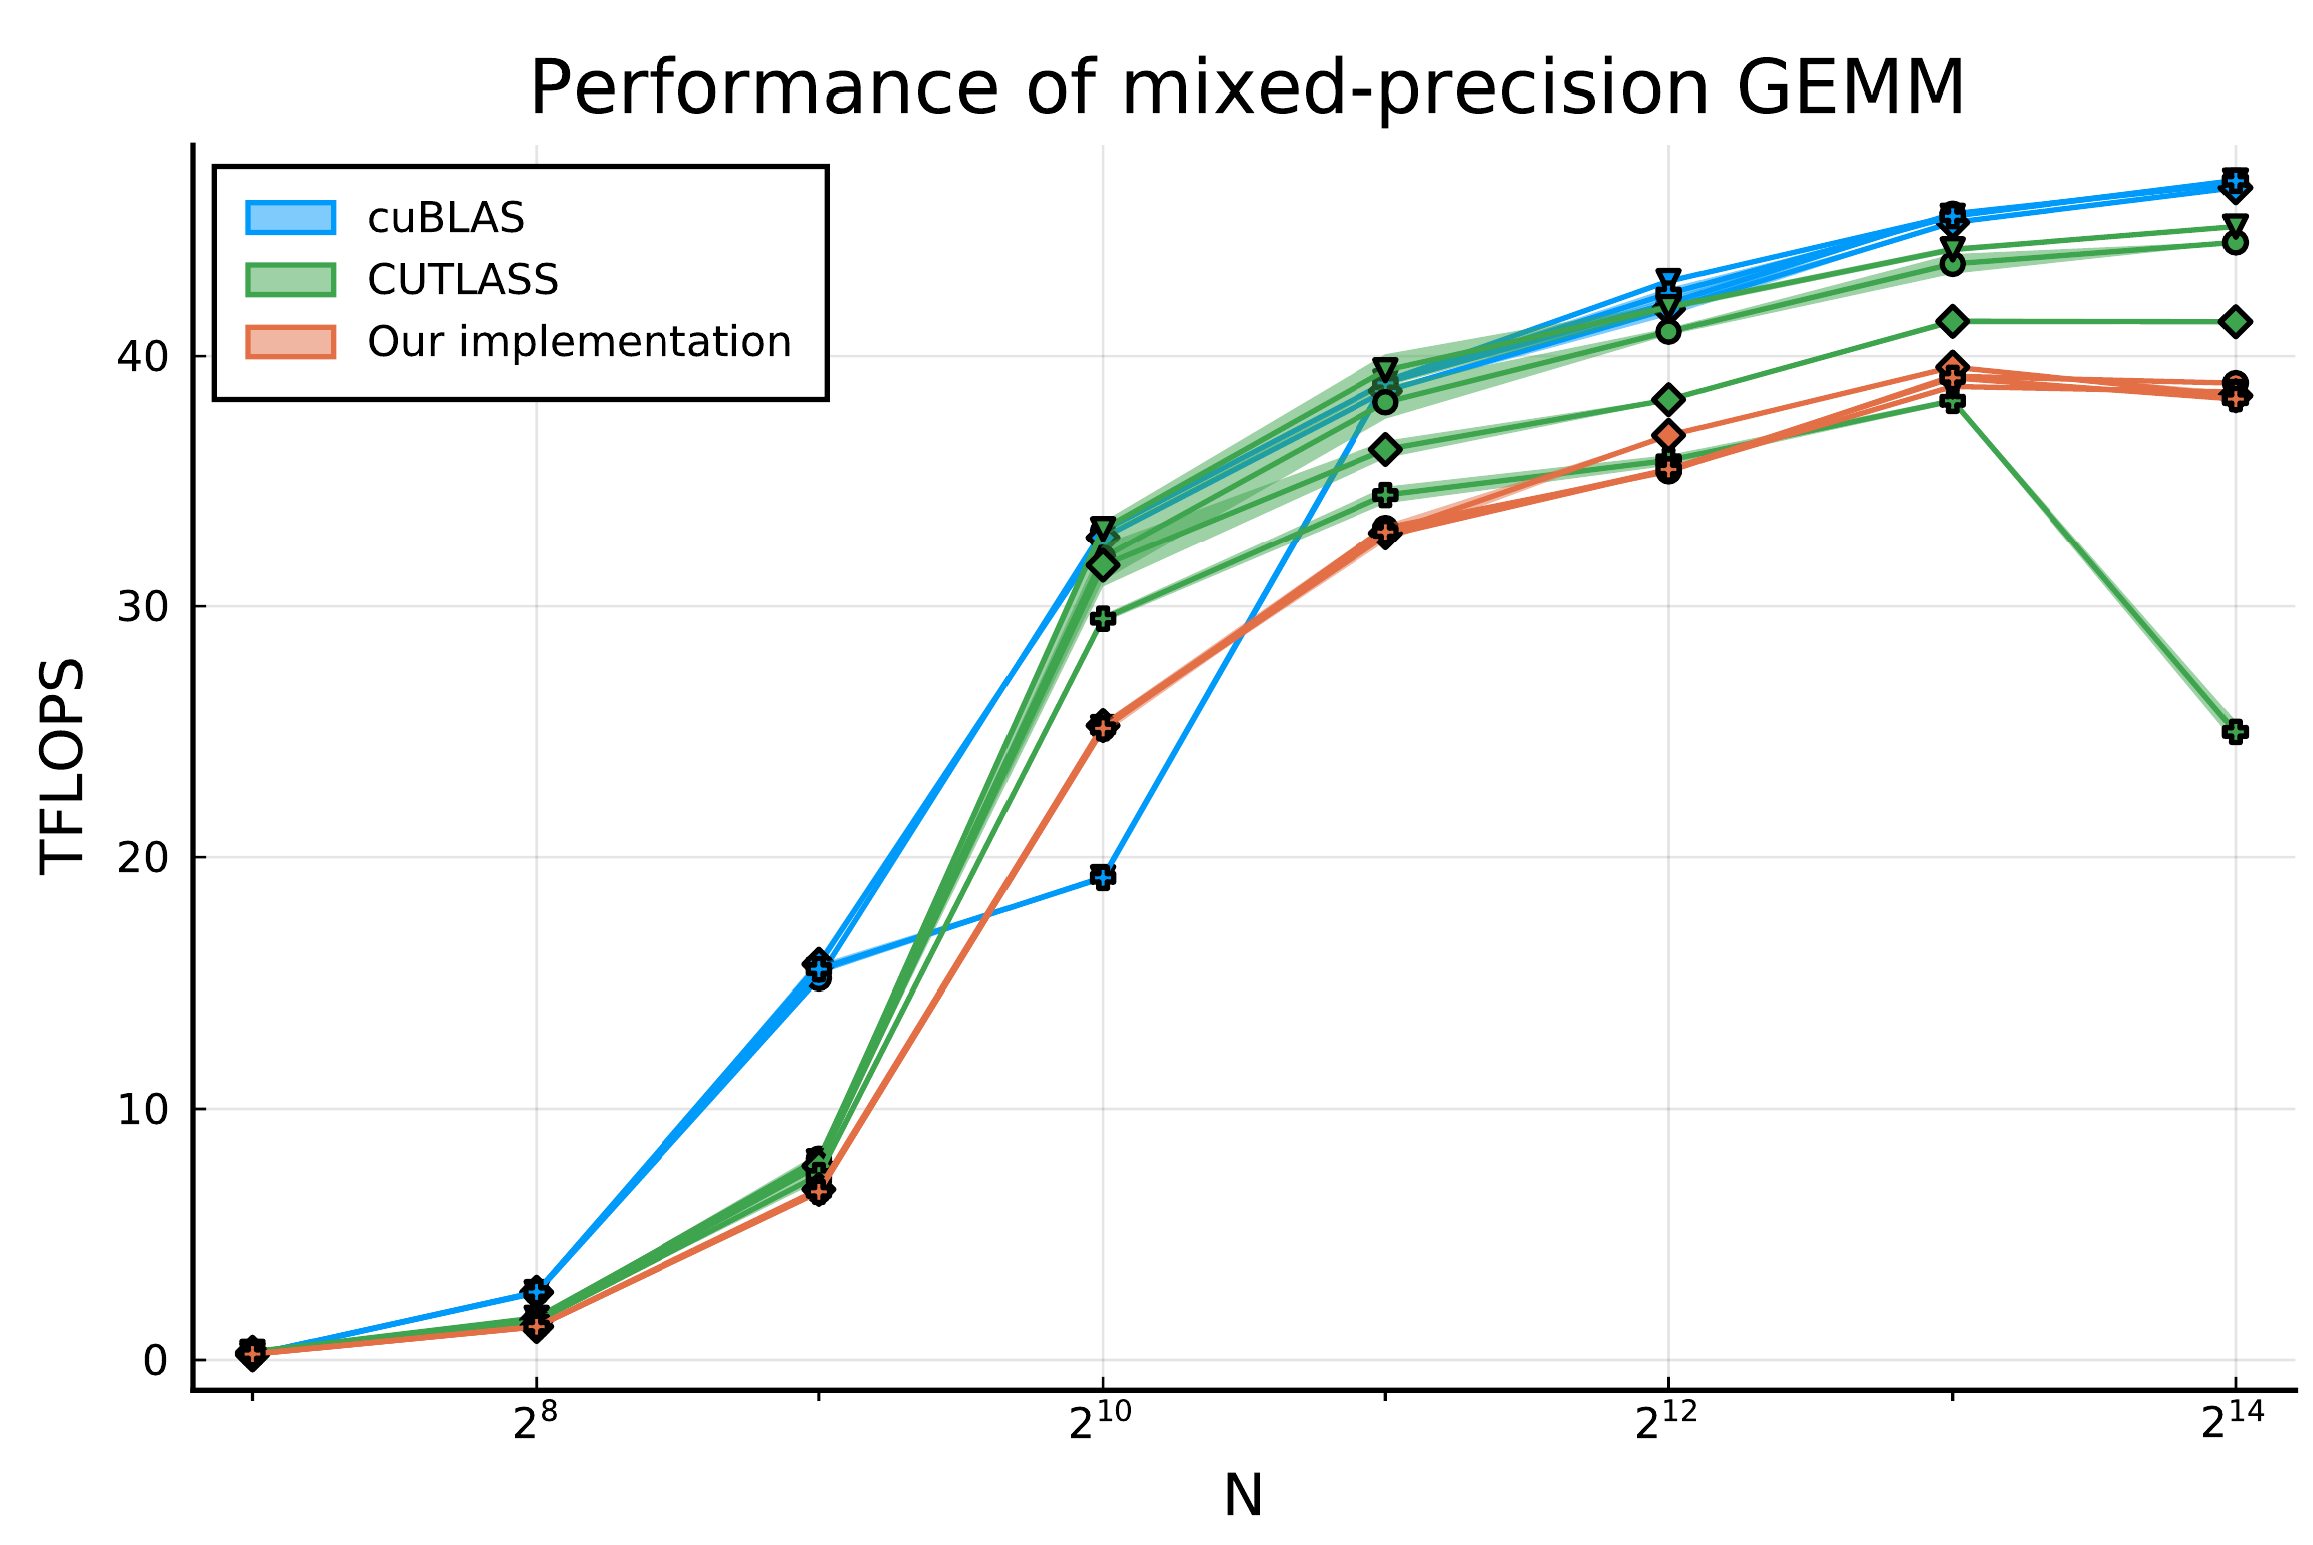 Performance of mixed-precision GEMM